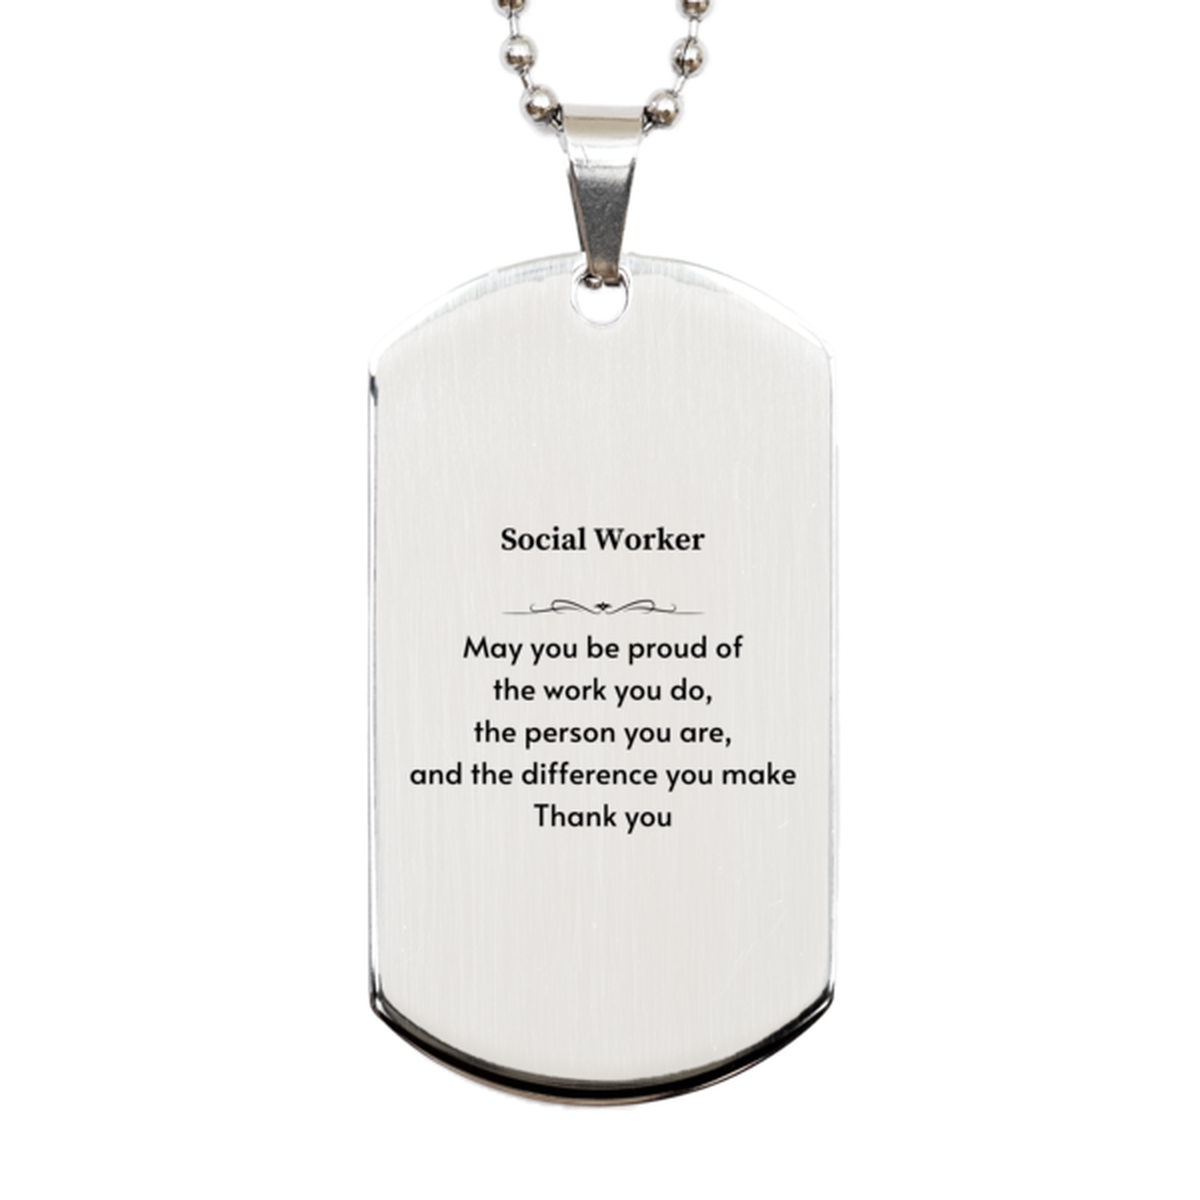 Heartwarming Silver Dog Tag Retirement Coworkers Gifts for Social Worker, Social Worker May You be proud of the work you do, the person you are Gifts for Boss Men Women Friends